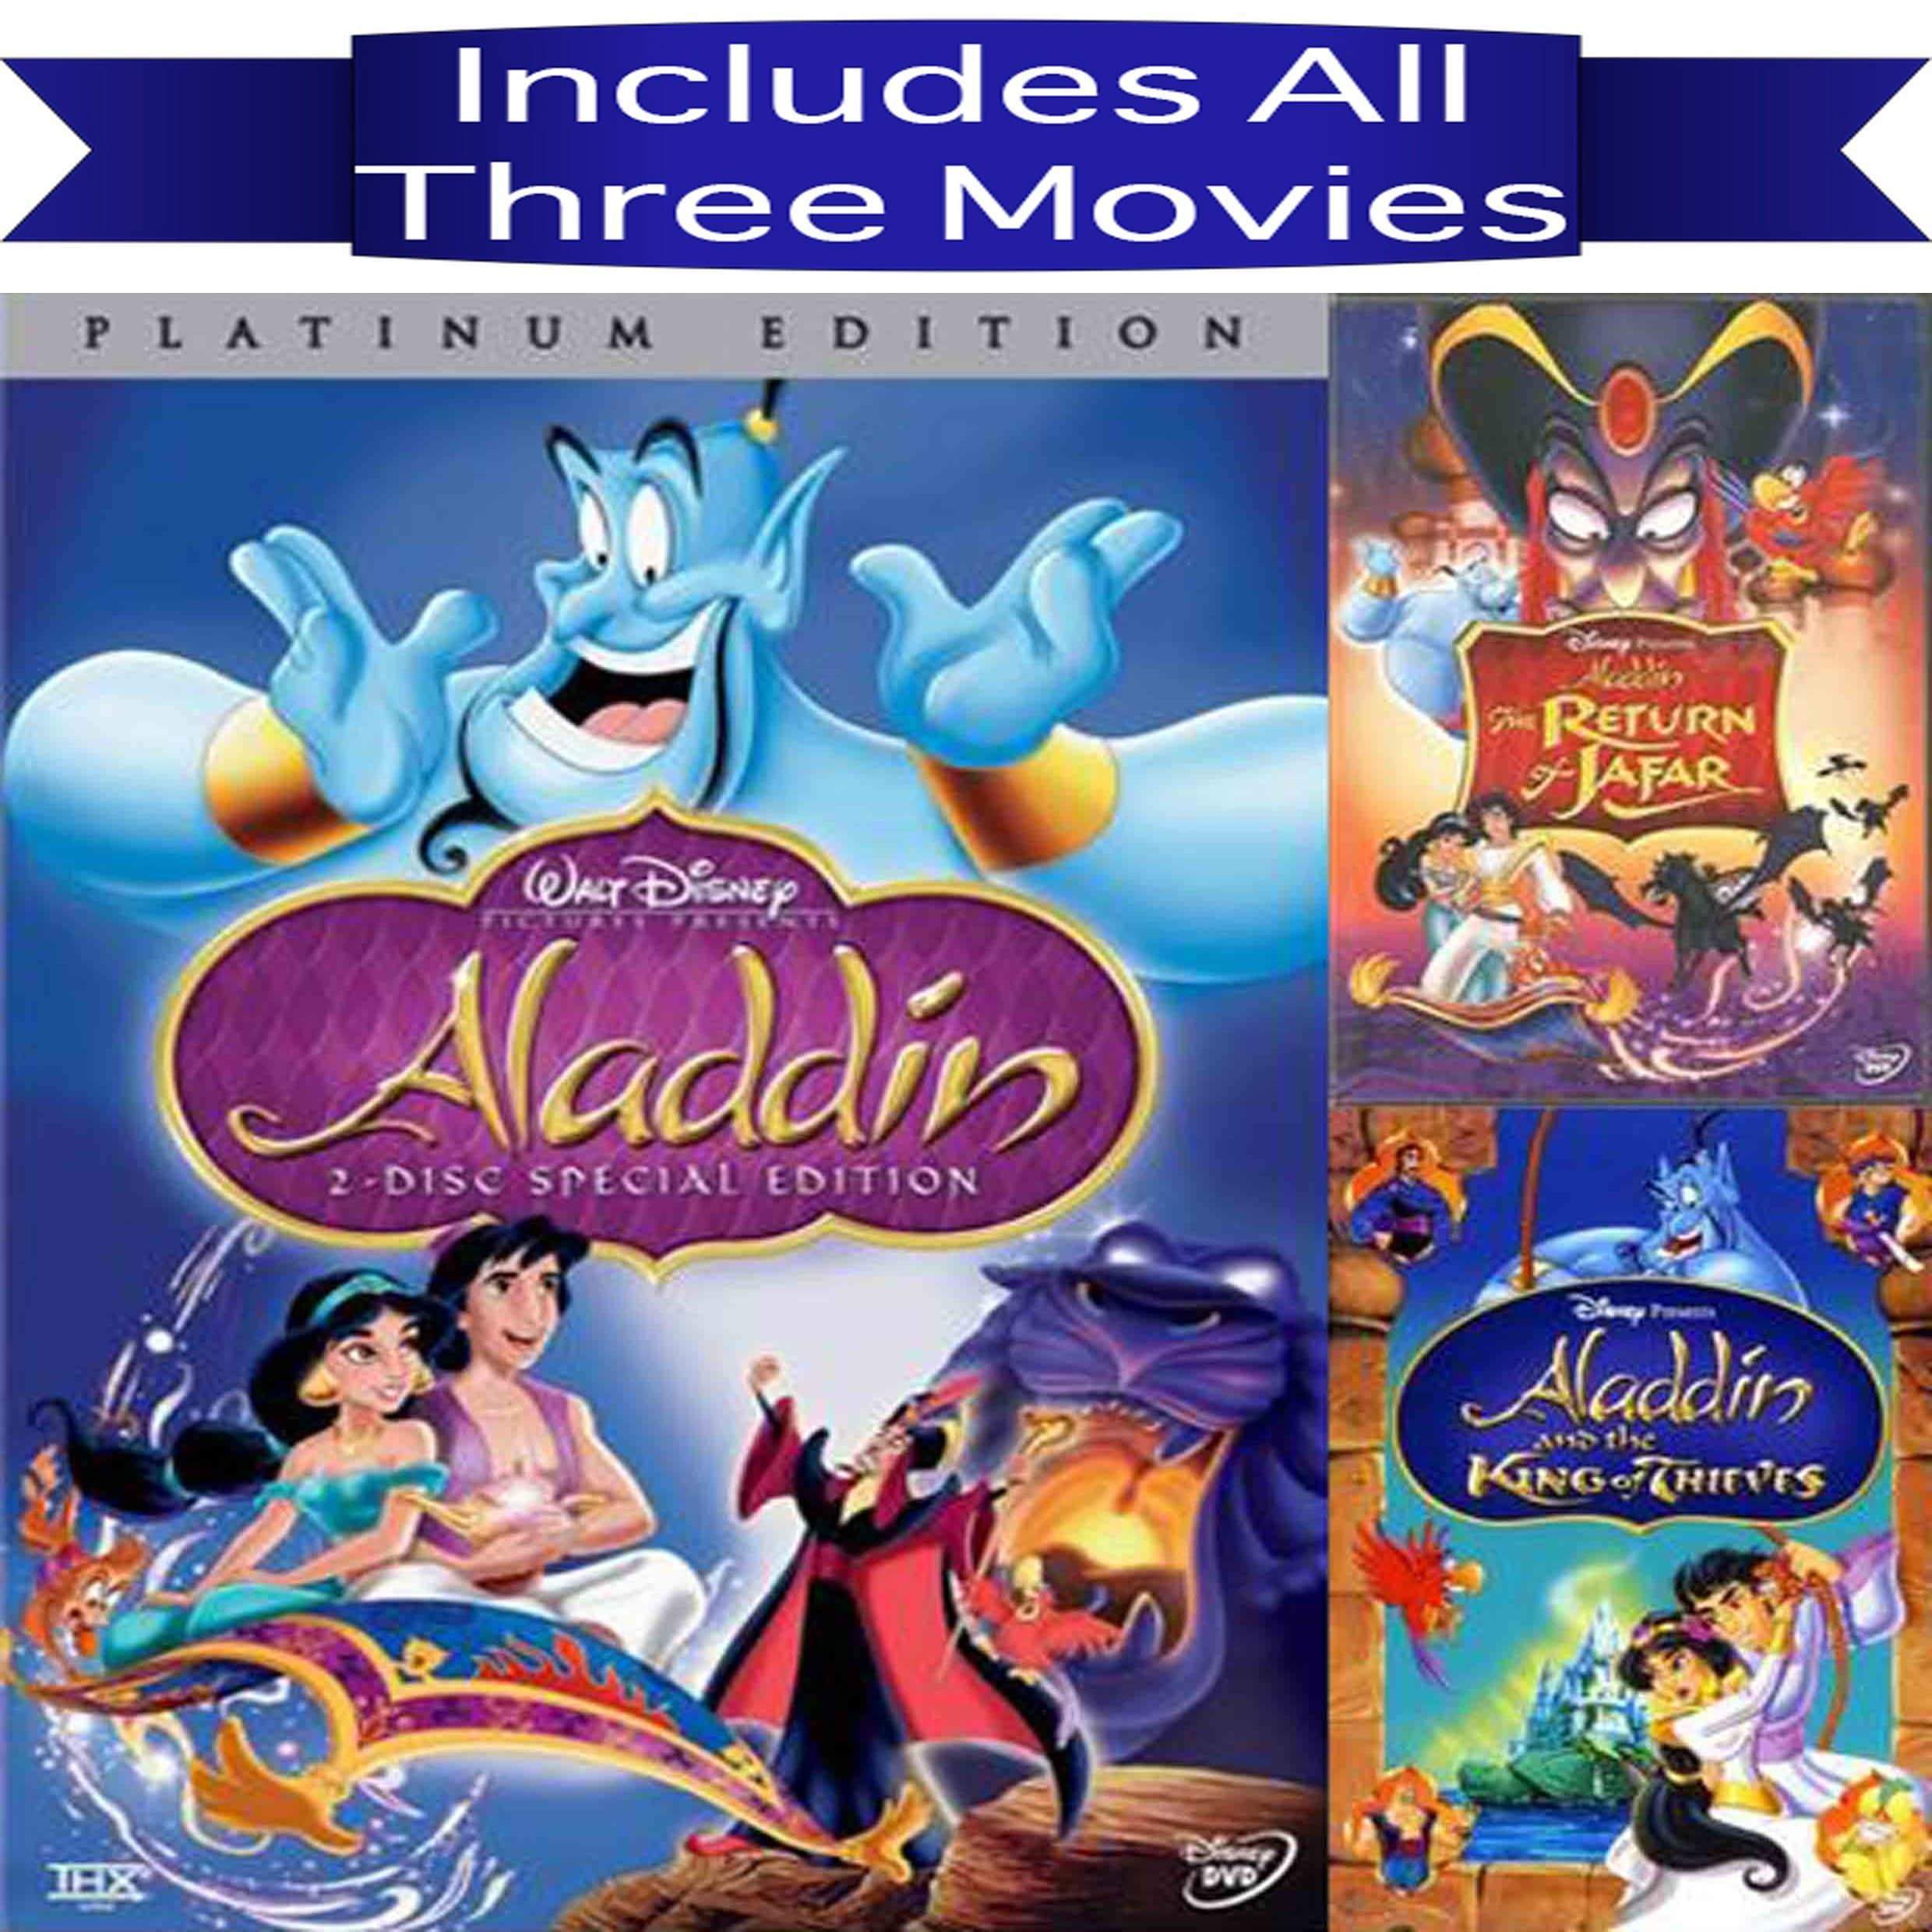 Disney's Aladdin Trilogy DVD Set Includes all 3 Animated Movies